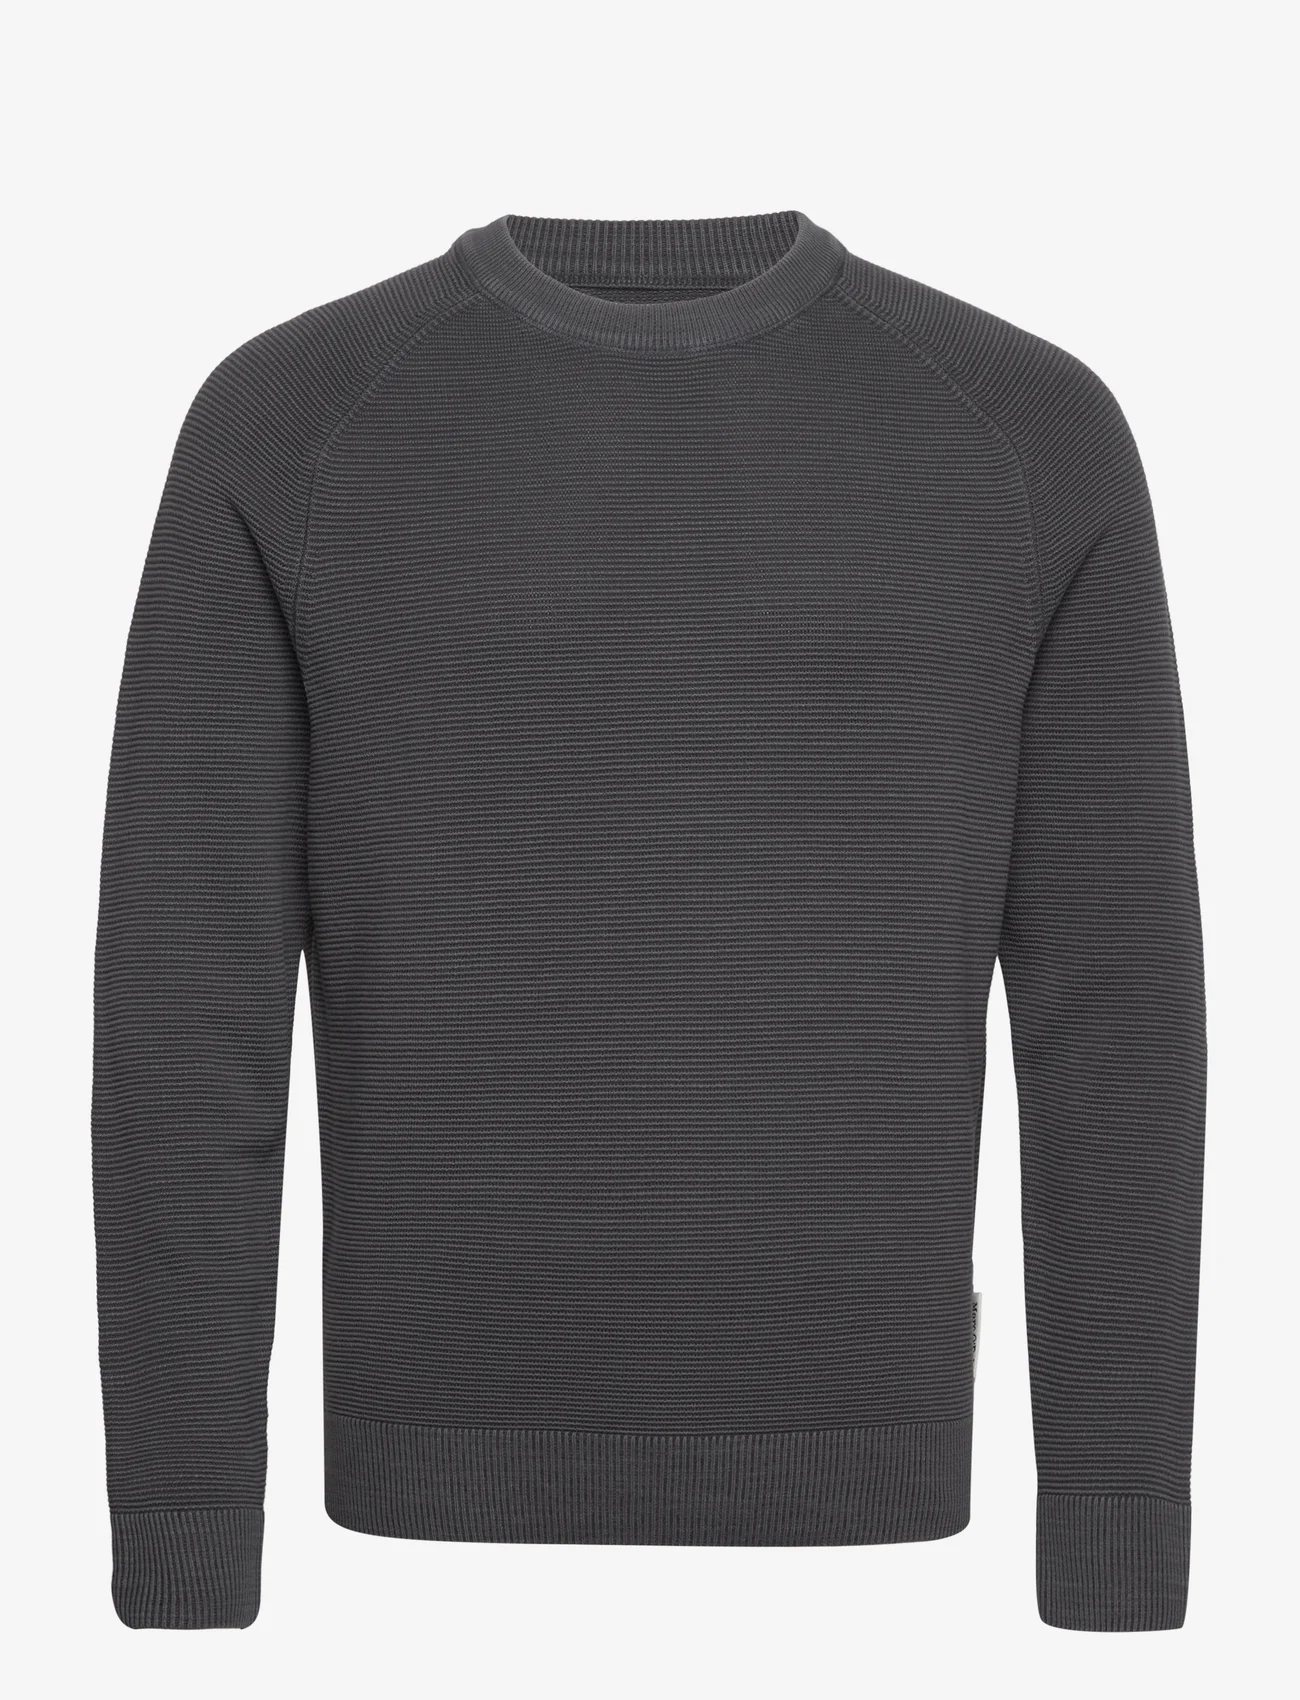 Marc O'Polo - PULLOVERS LONG SLEEVE - rundhals - gray pin - 0